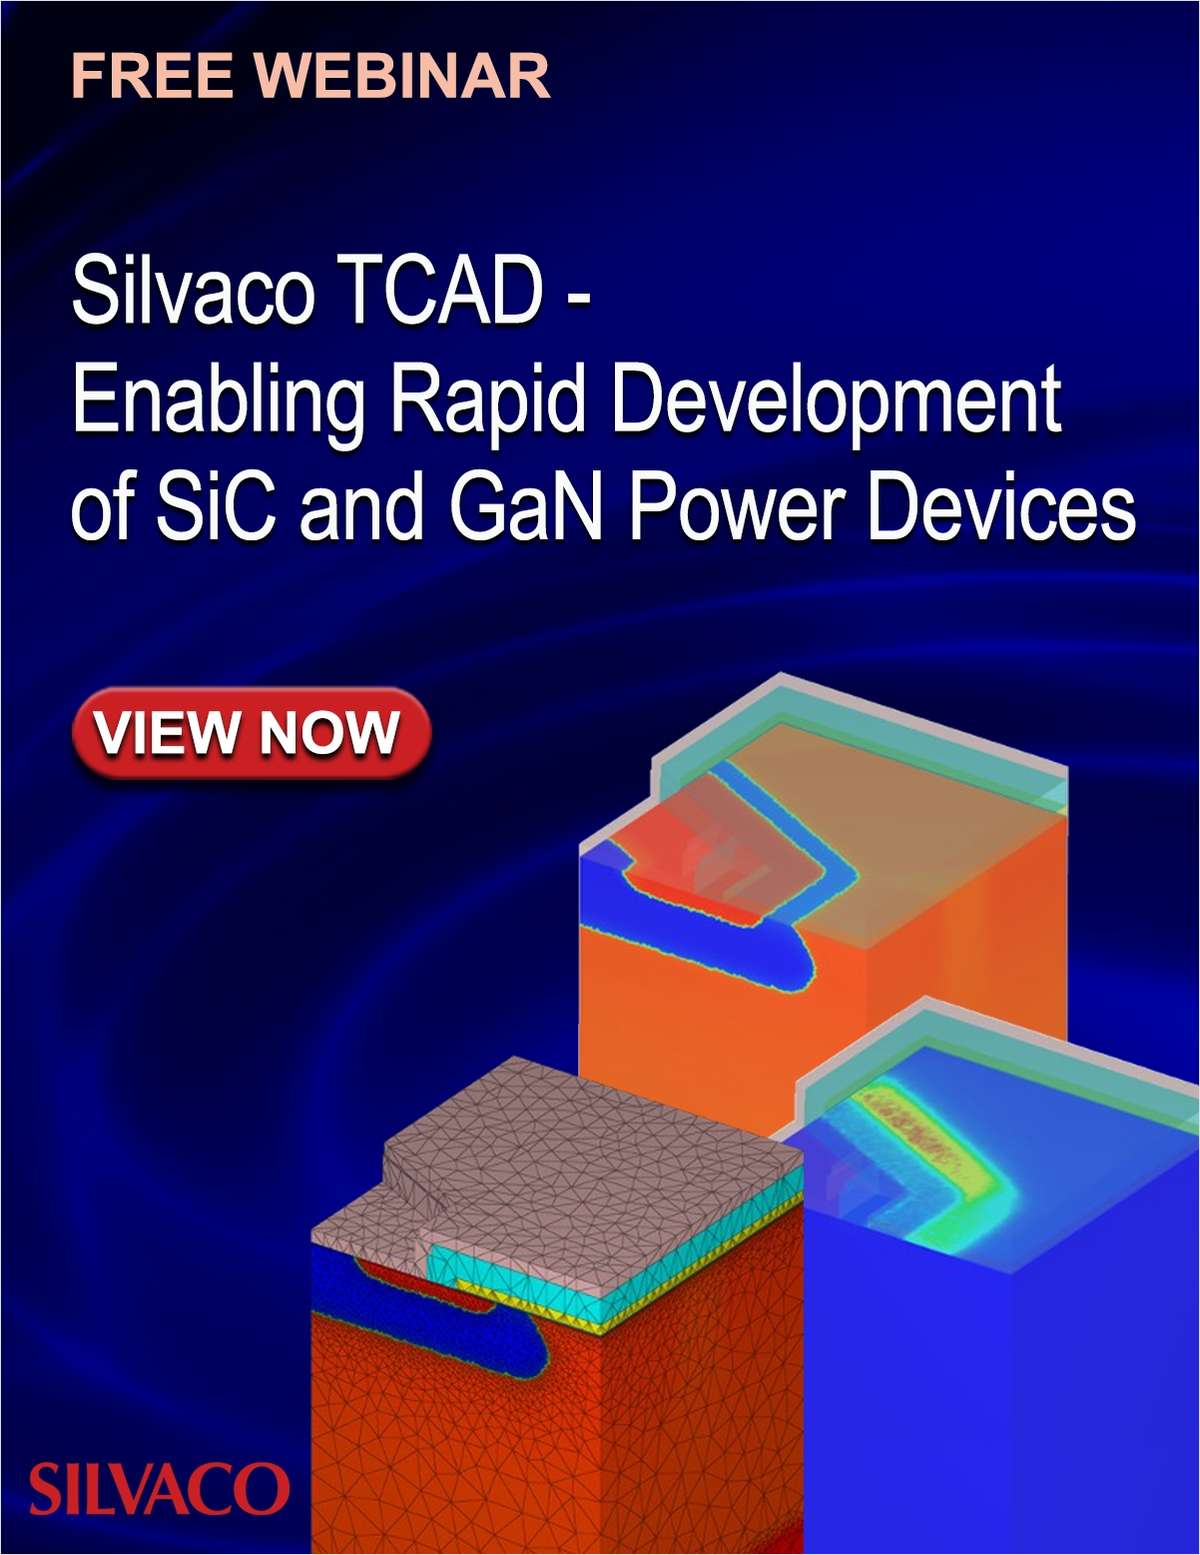 Silvaco TCAD Enables Rapid Development of SiC and GaN Power Devices